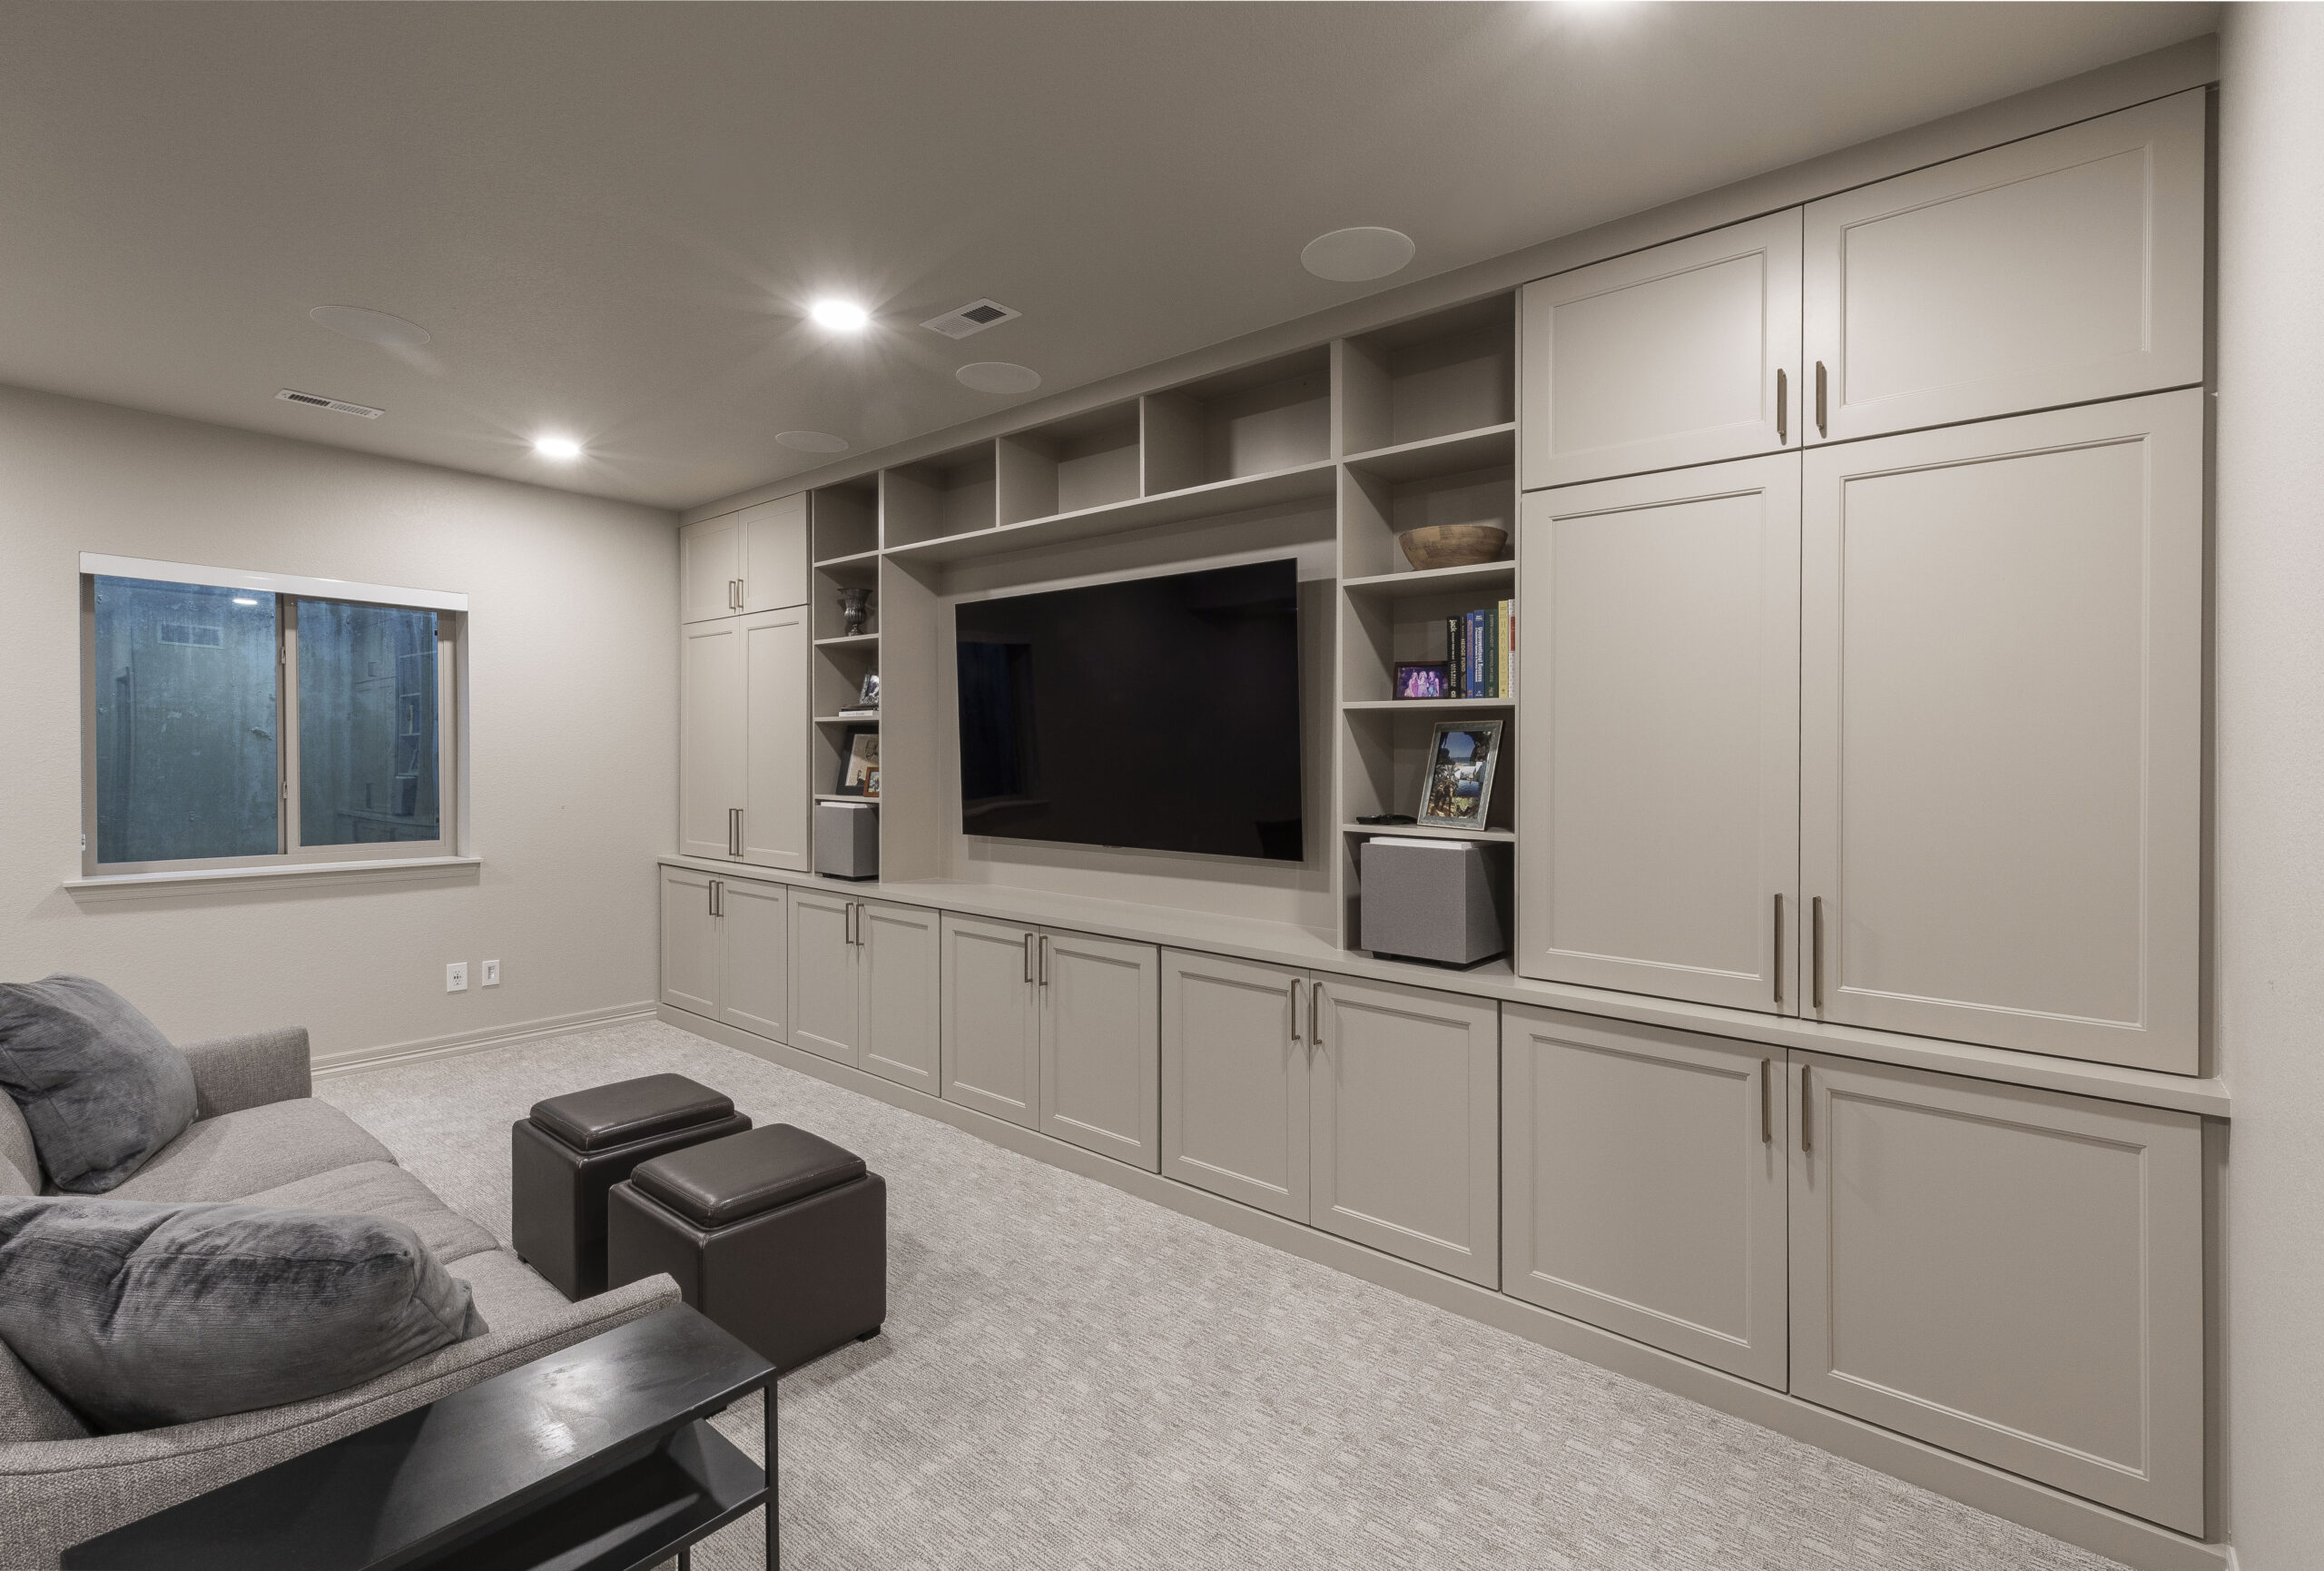 Basement home theater with built-in cabinets, a large TV, and a sofa, highlighting a functional and well-designed entertainment area.